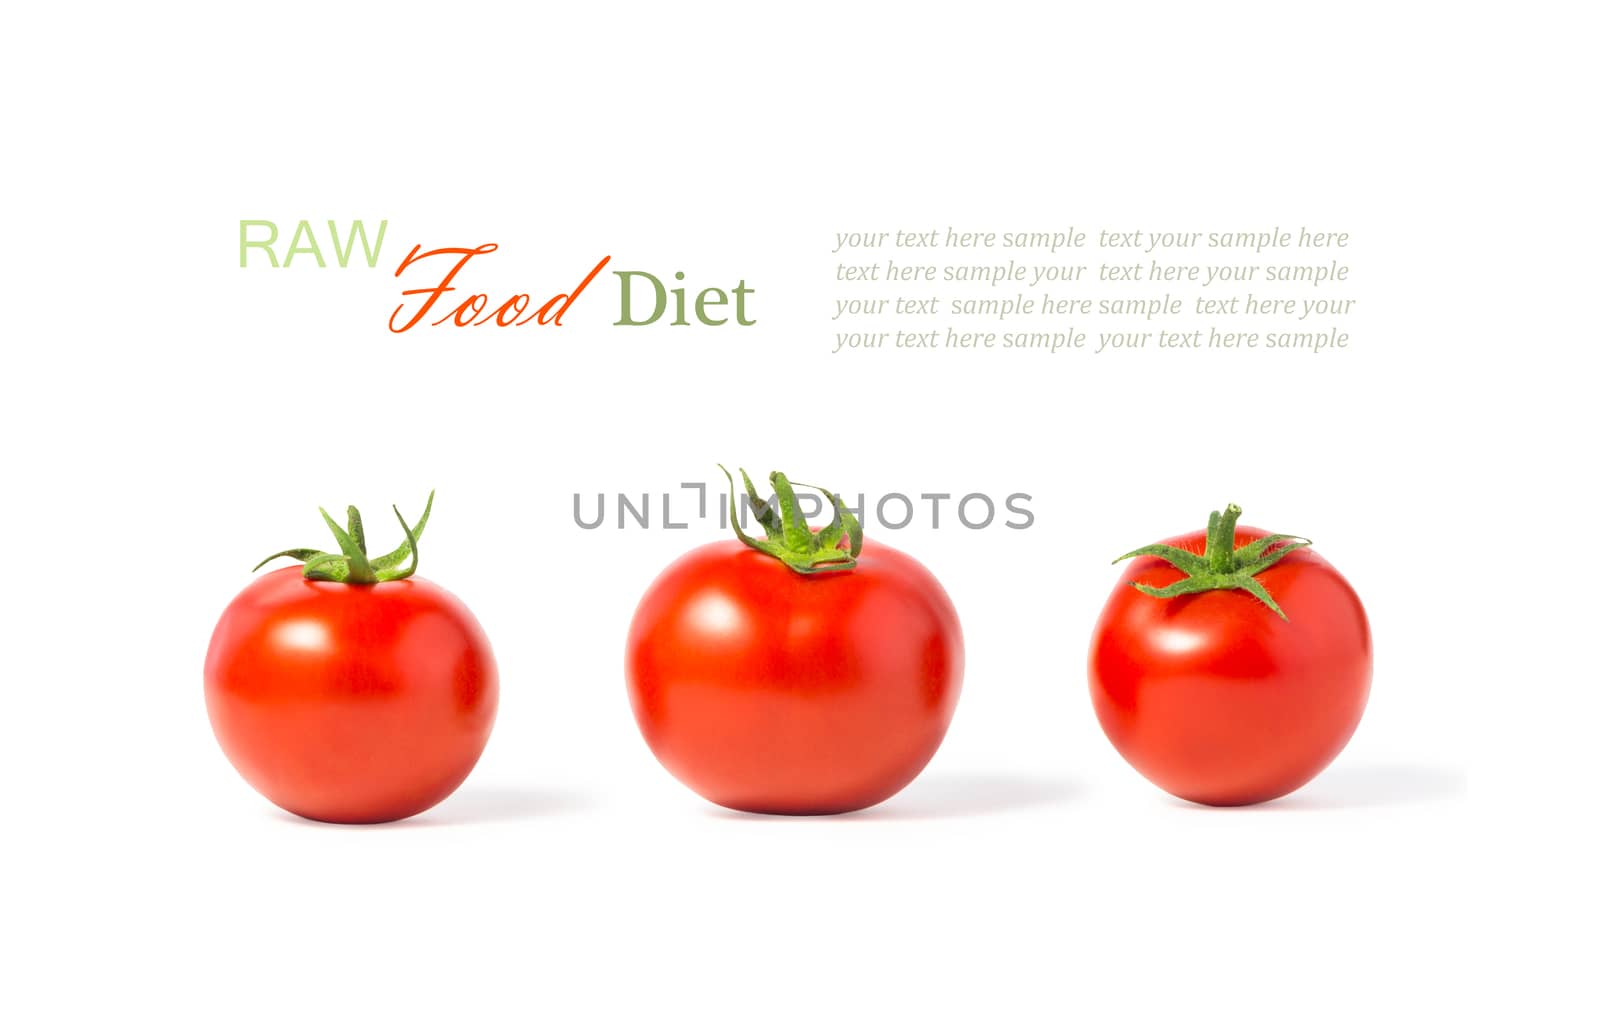 The concept of a raw food diet, healthy eating by iprachenko